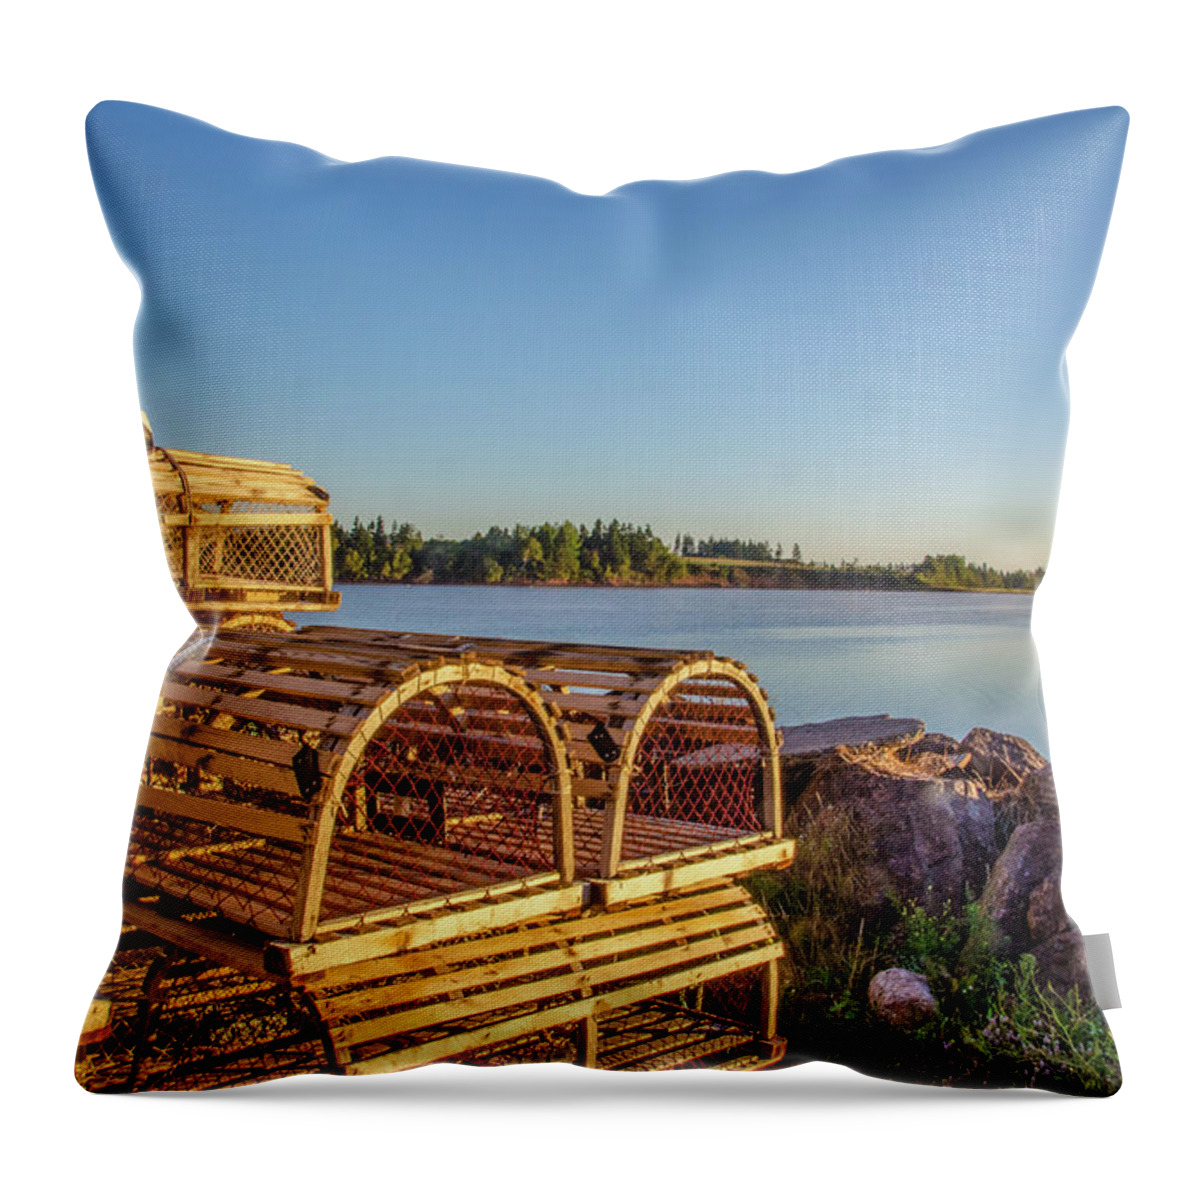 Lobster Throw Pillow featuring the photograph Atlantic Maritime Harborfront Scene by Douglas Wielfaert